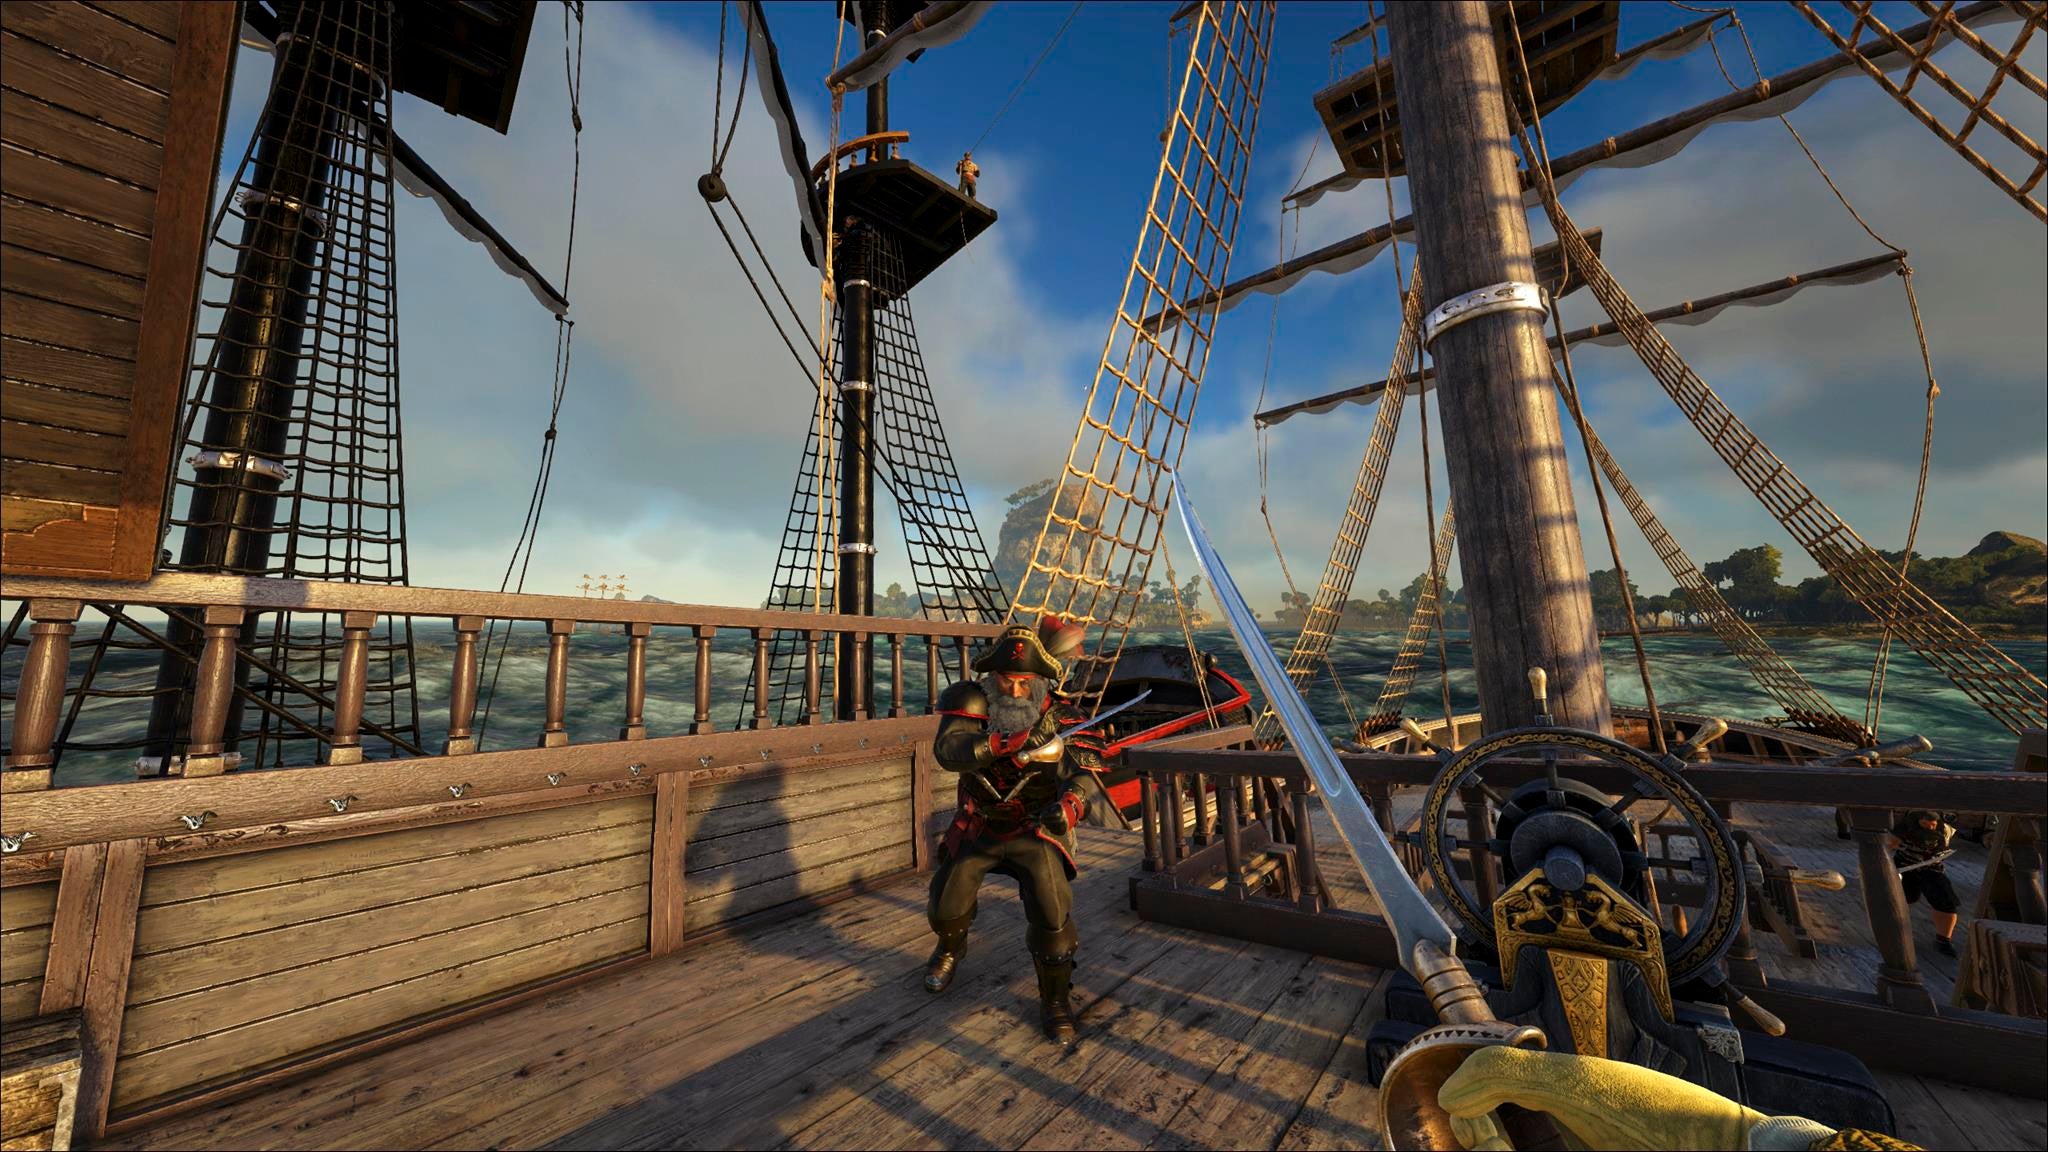 pirate games you can play right now | VG247